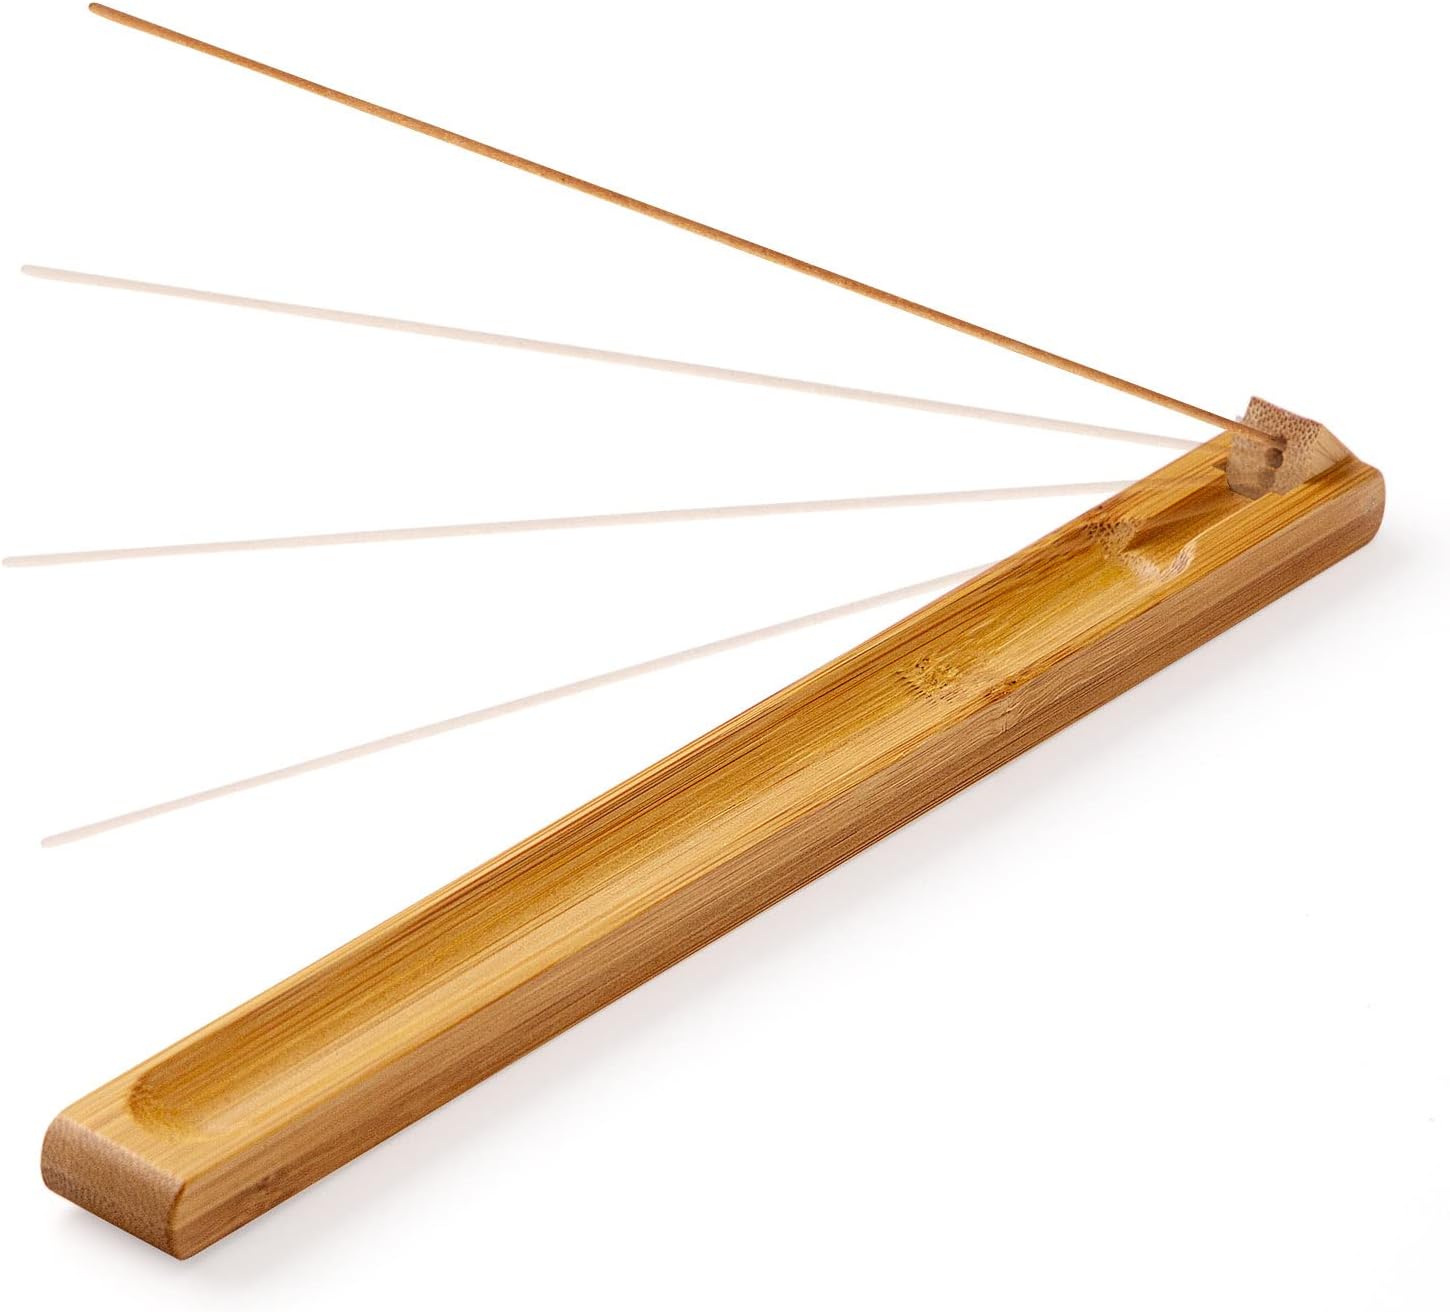 Cacukap Bamboo Wood Incense Holder for Sticks with Adjustable Angle